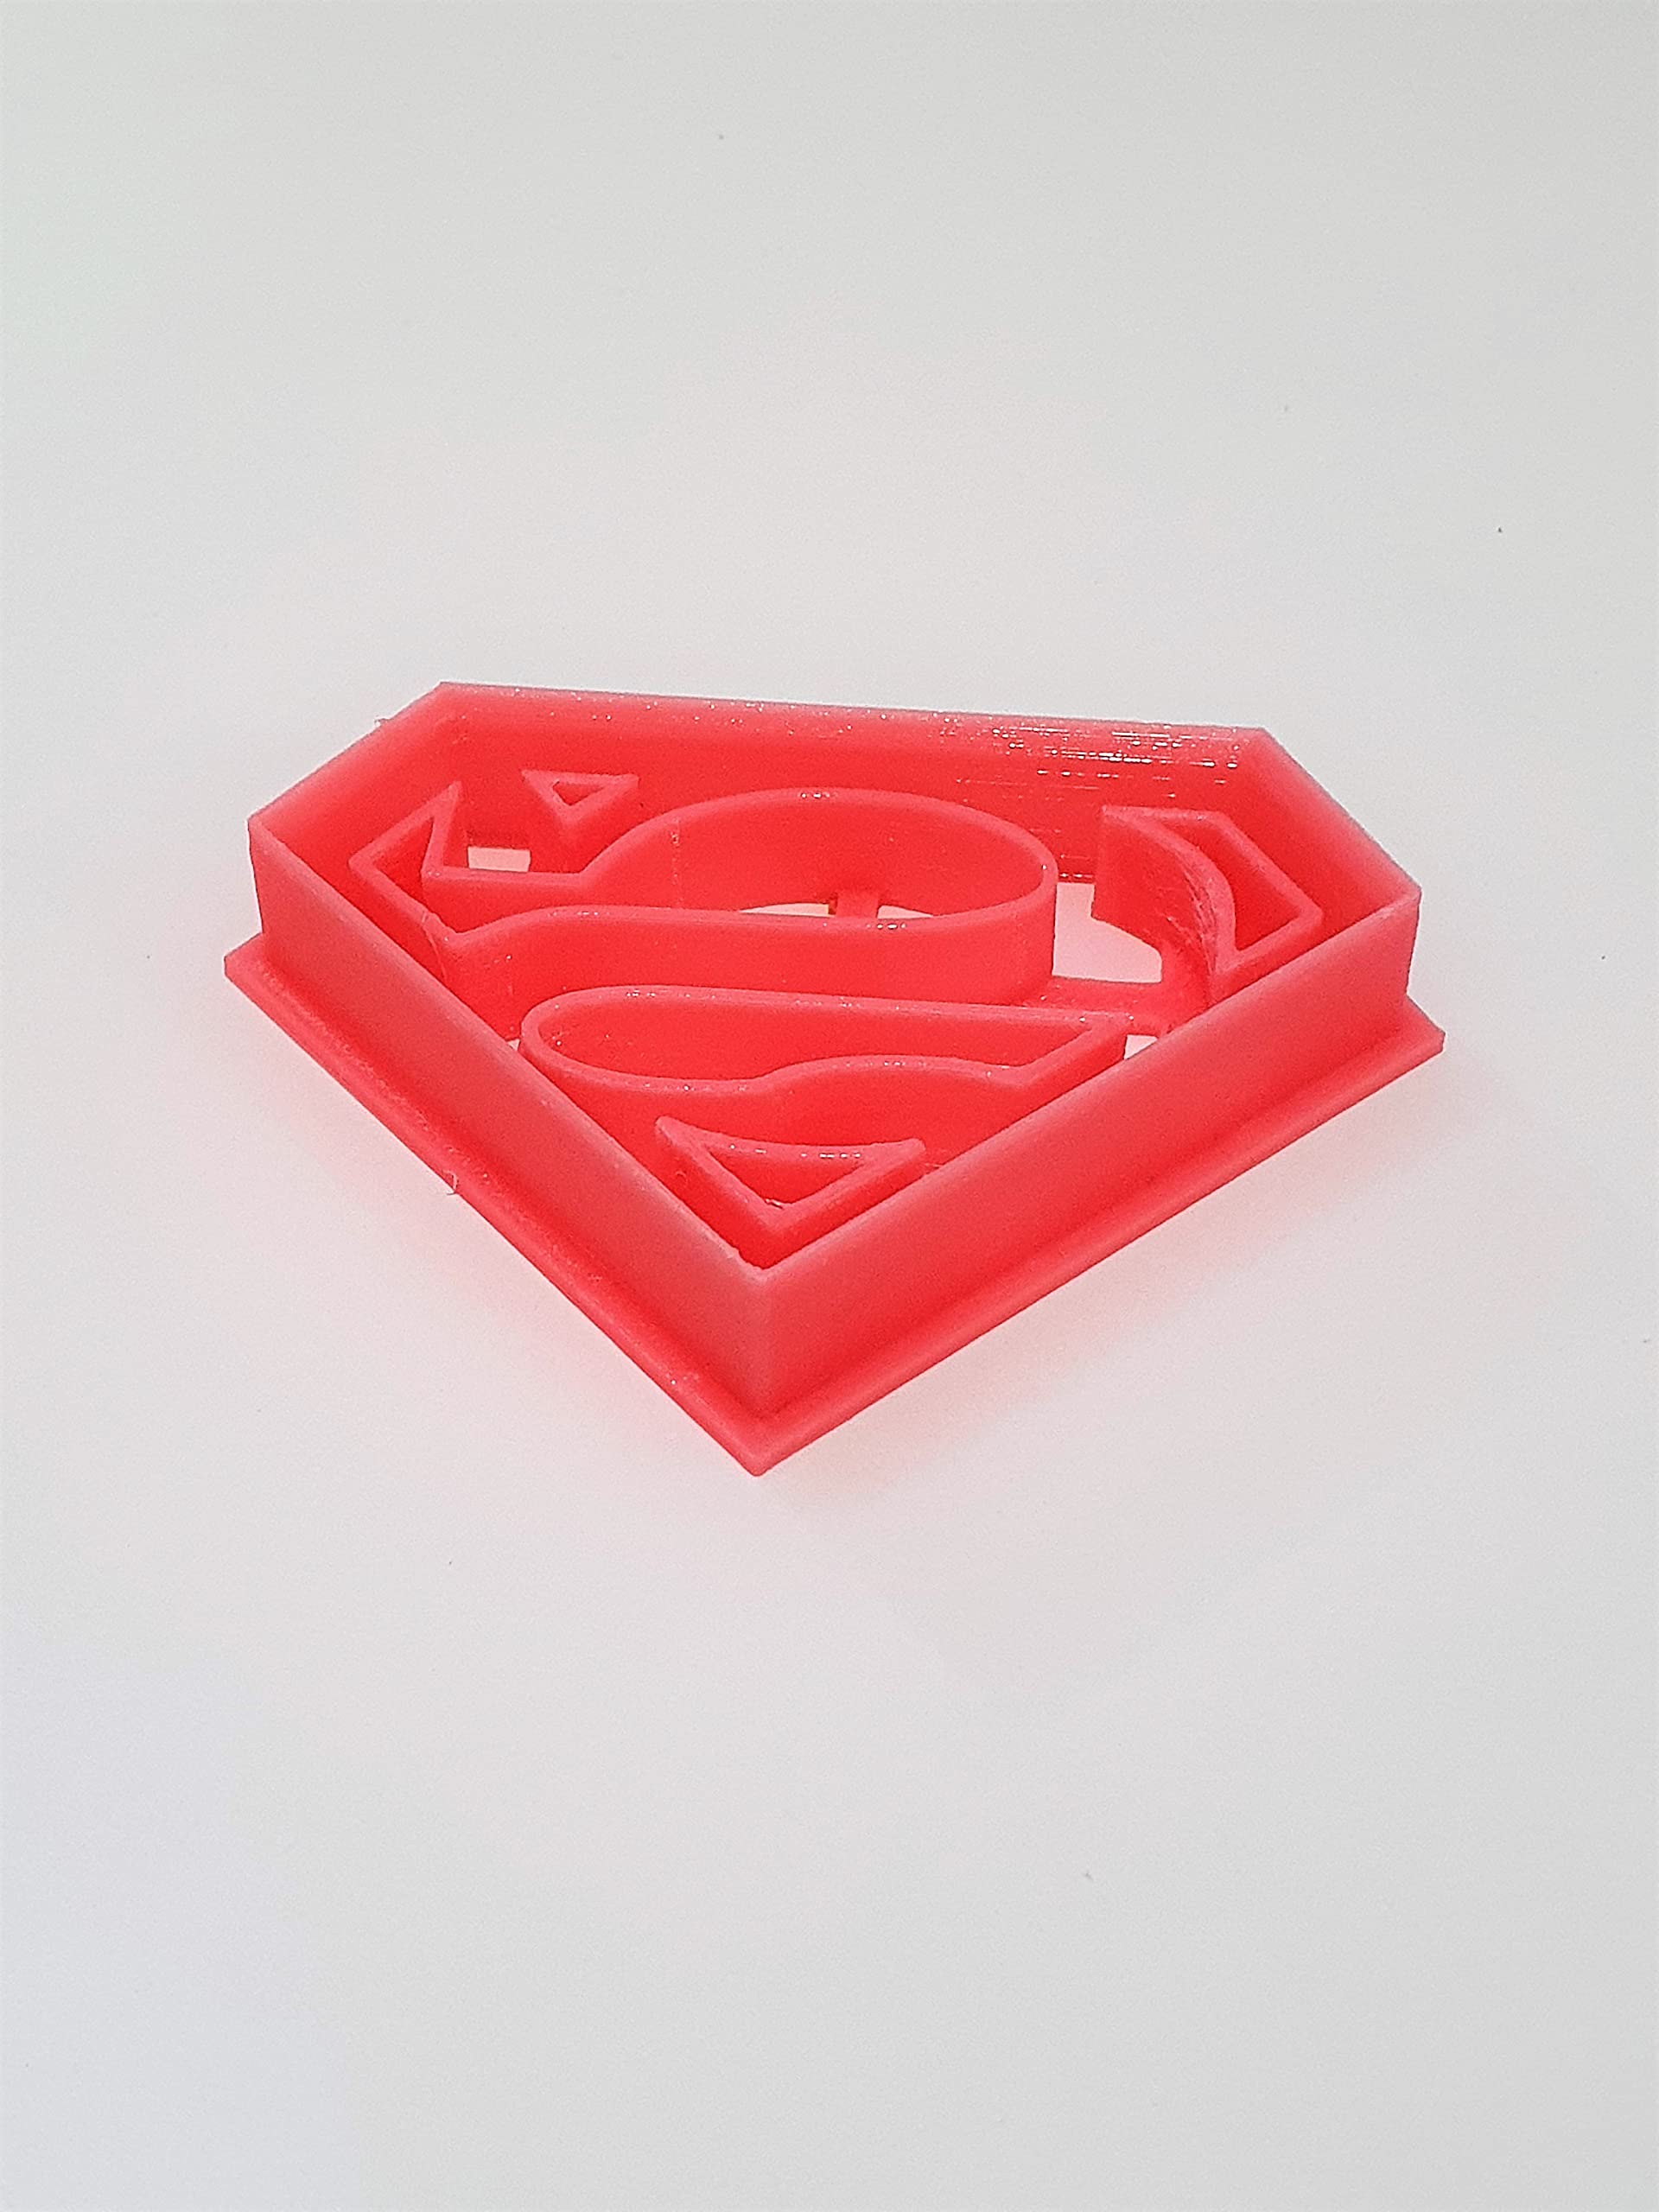 T3D Cookie Cutters Super man Cookie Cutter, Suitable for Cakes Biscuit and Fondant Cookie Mold for Homemade Treats, 3.54 in x 2.68 in x 0.55 in